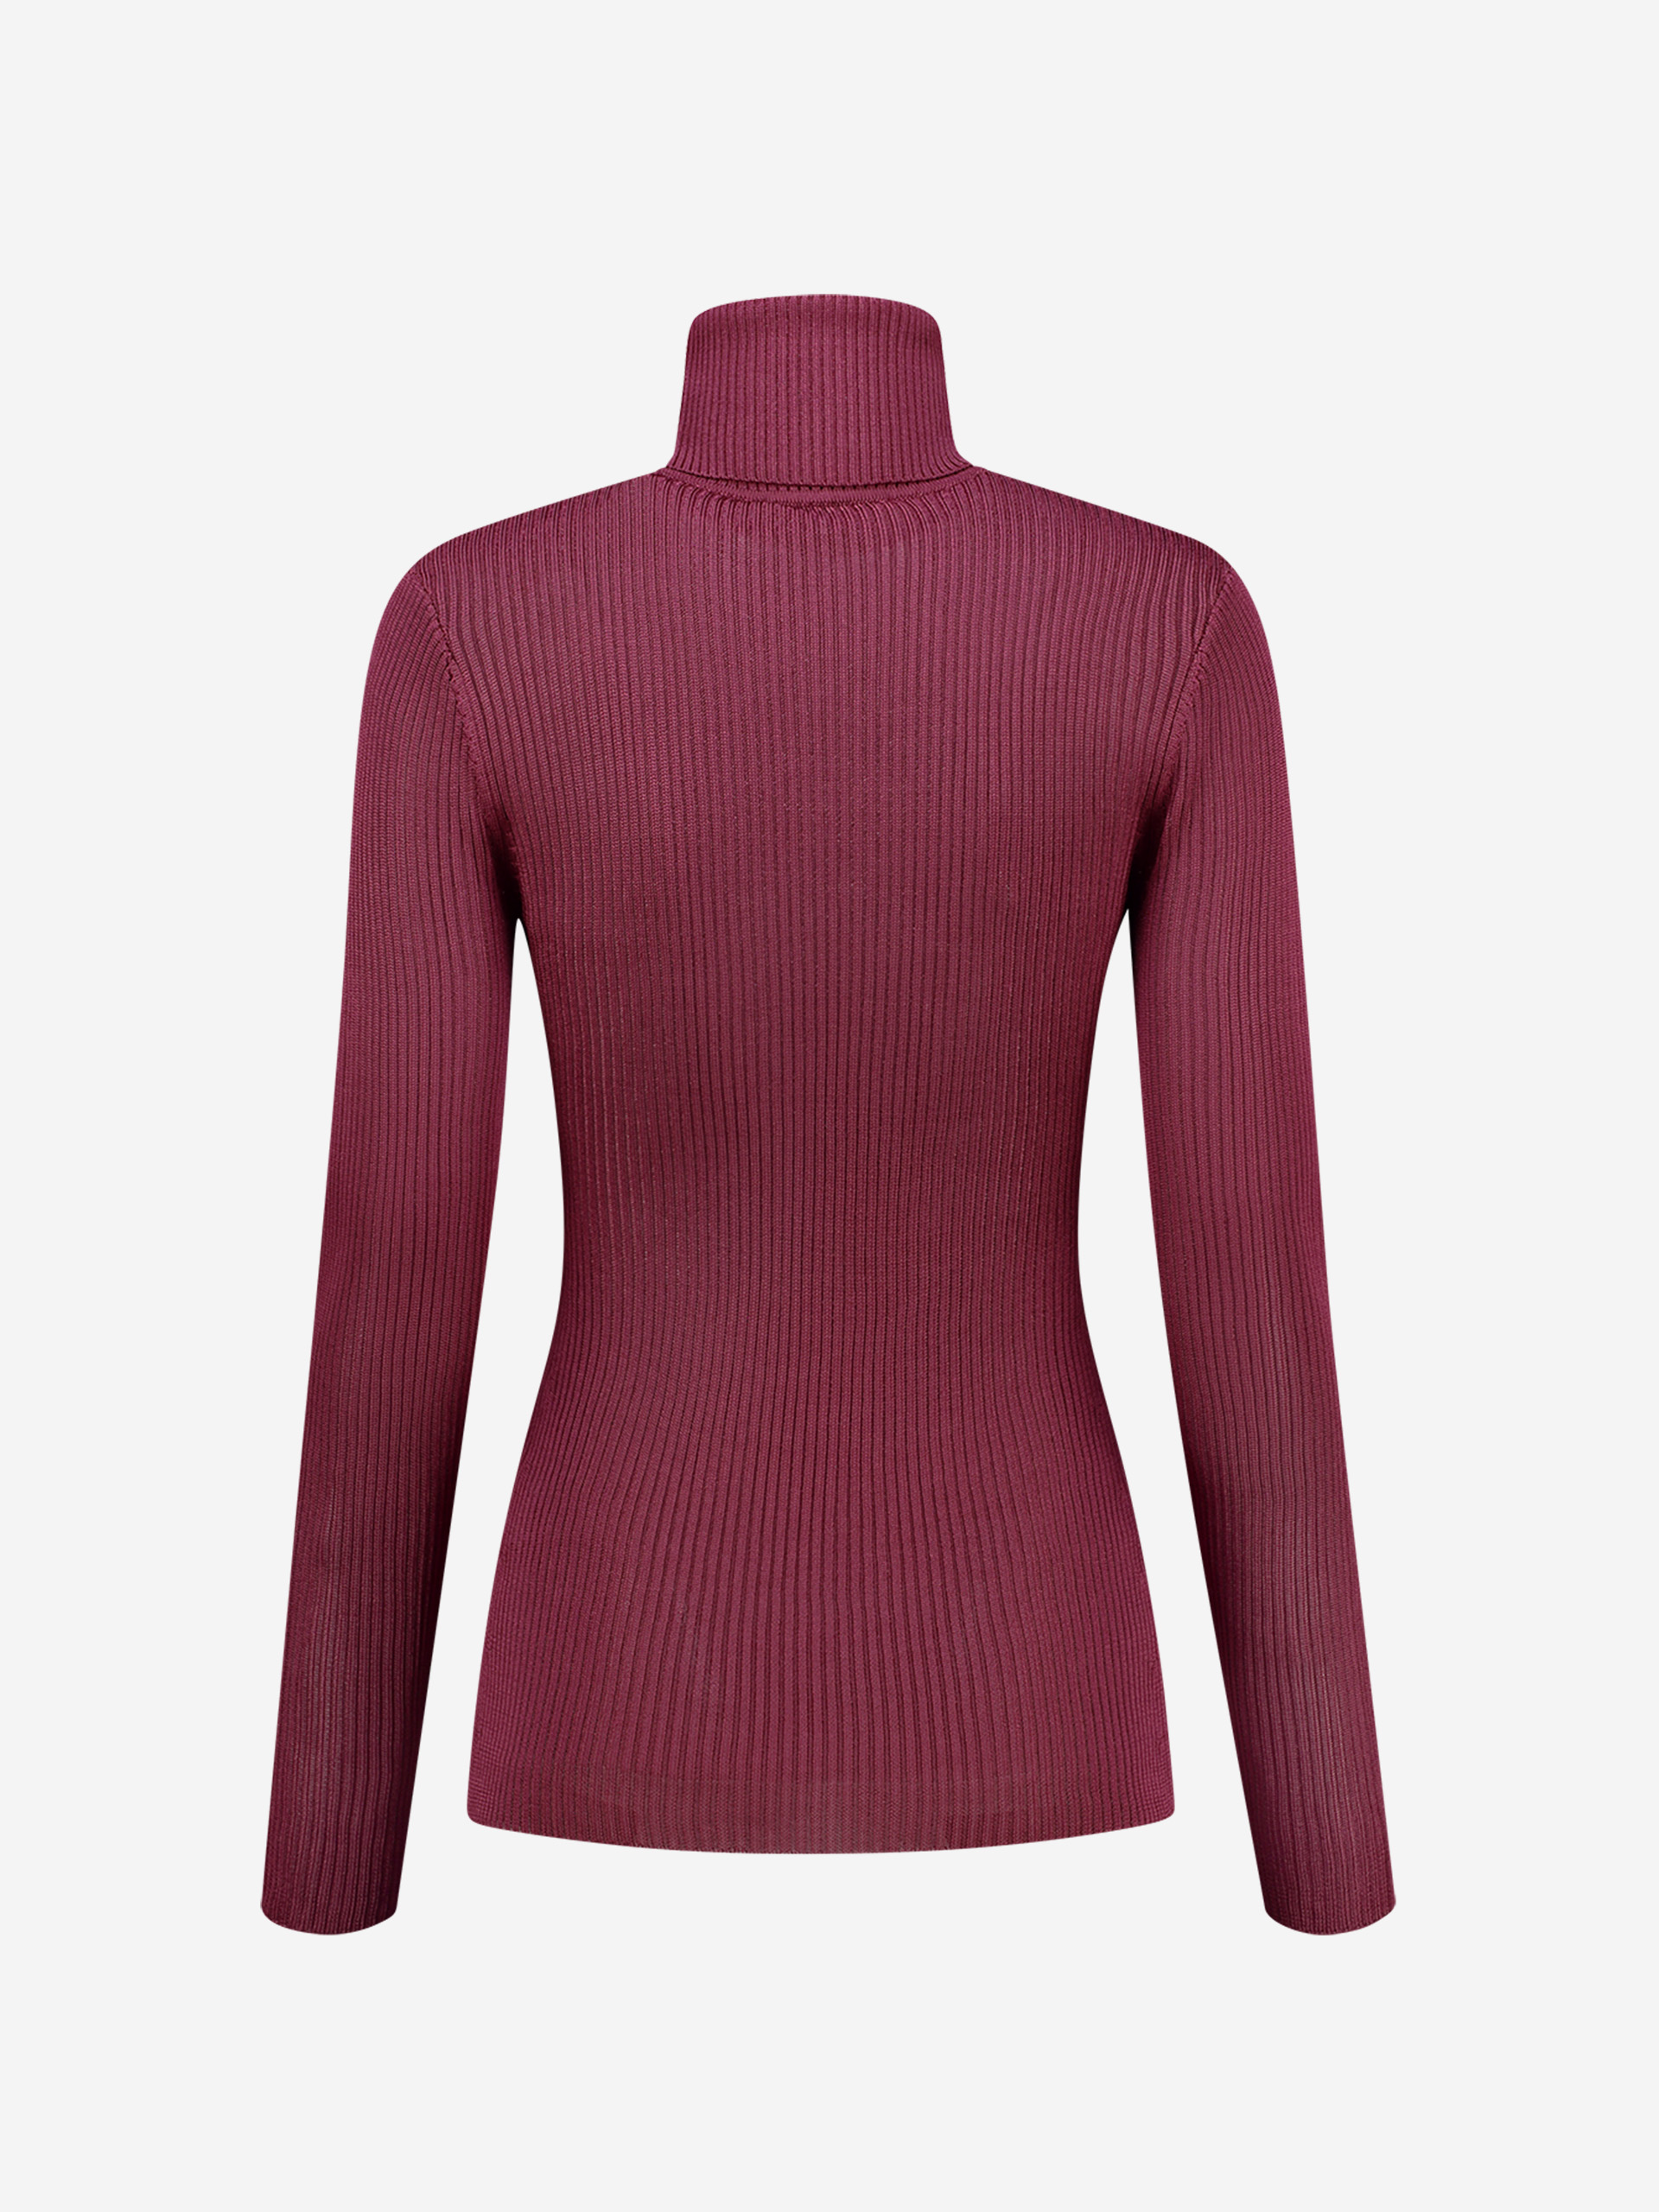 King Turtle Neck Top